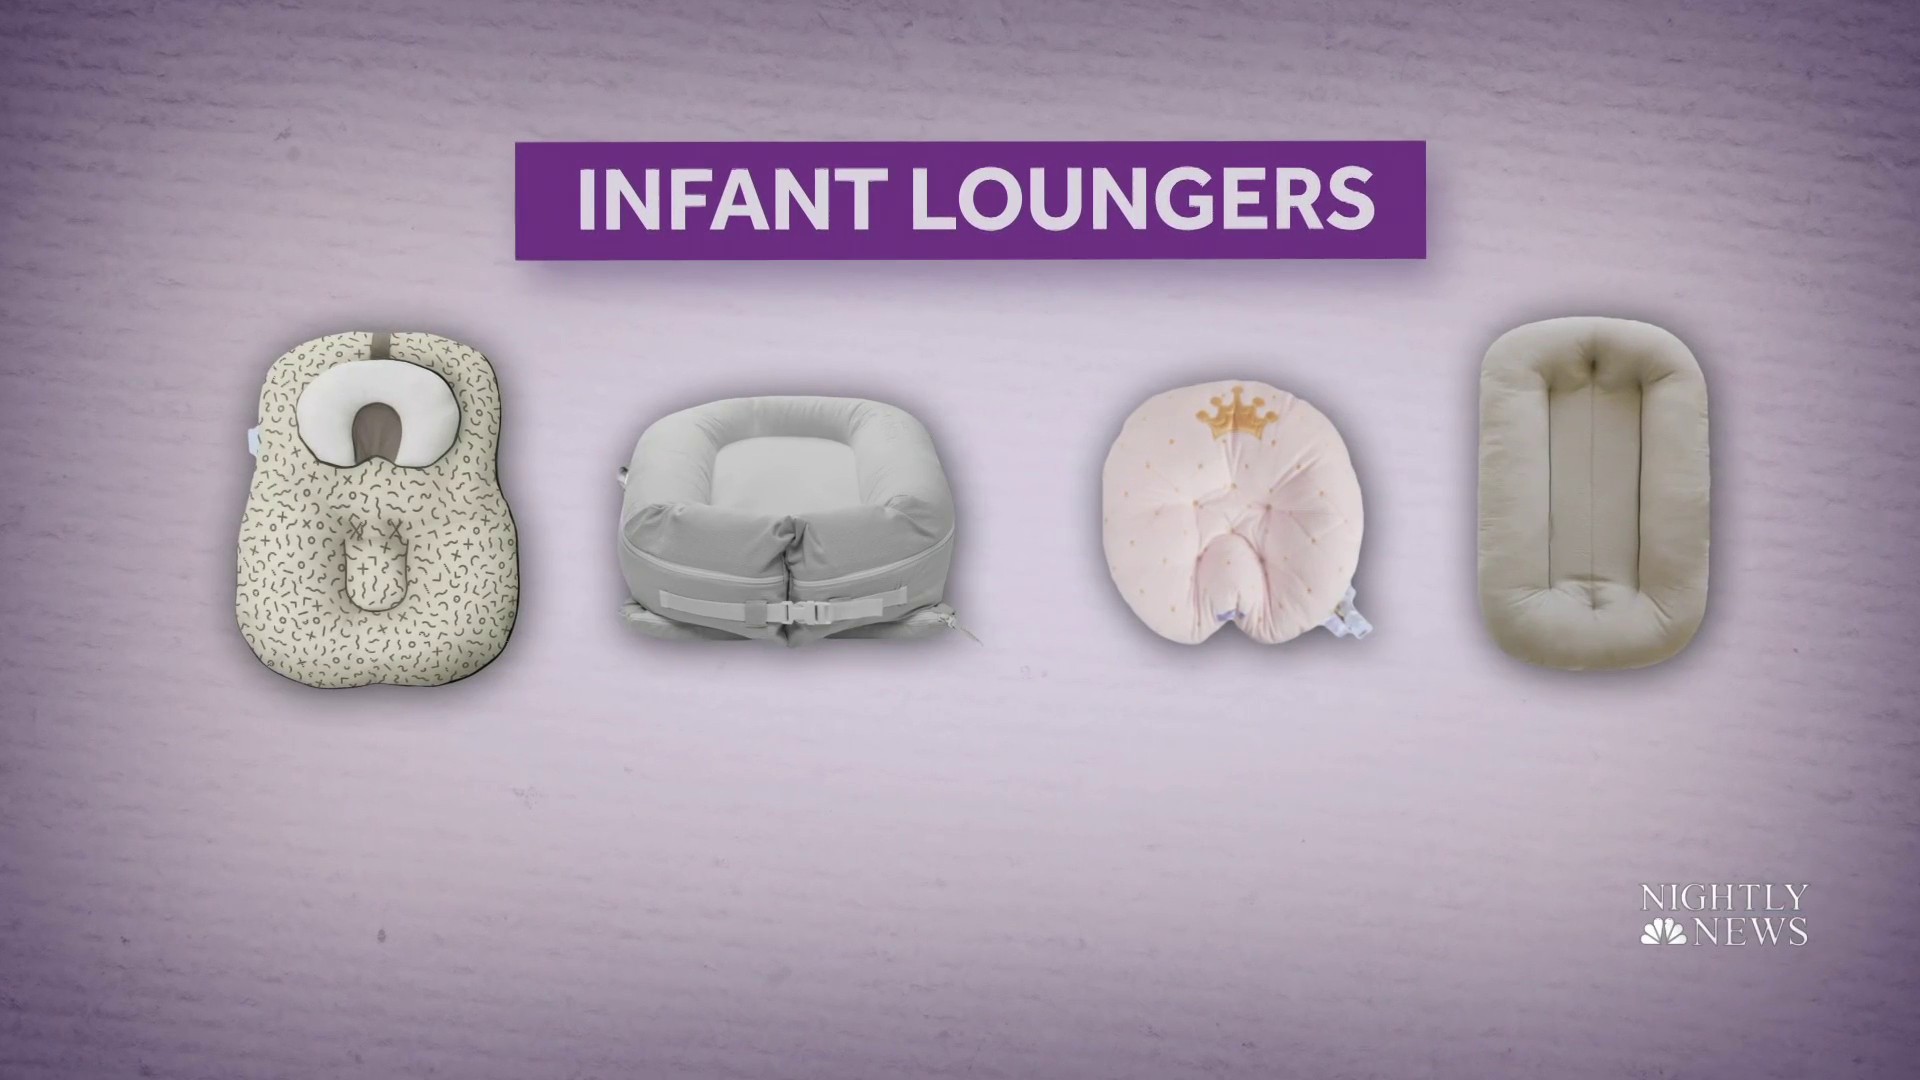 Baby loungers tied to more deaths than previously announced